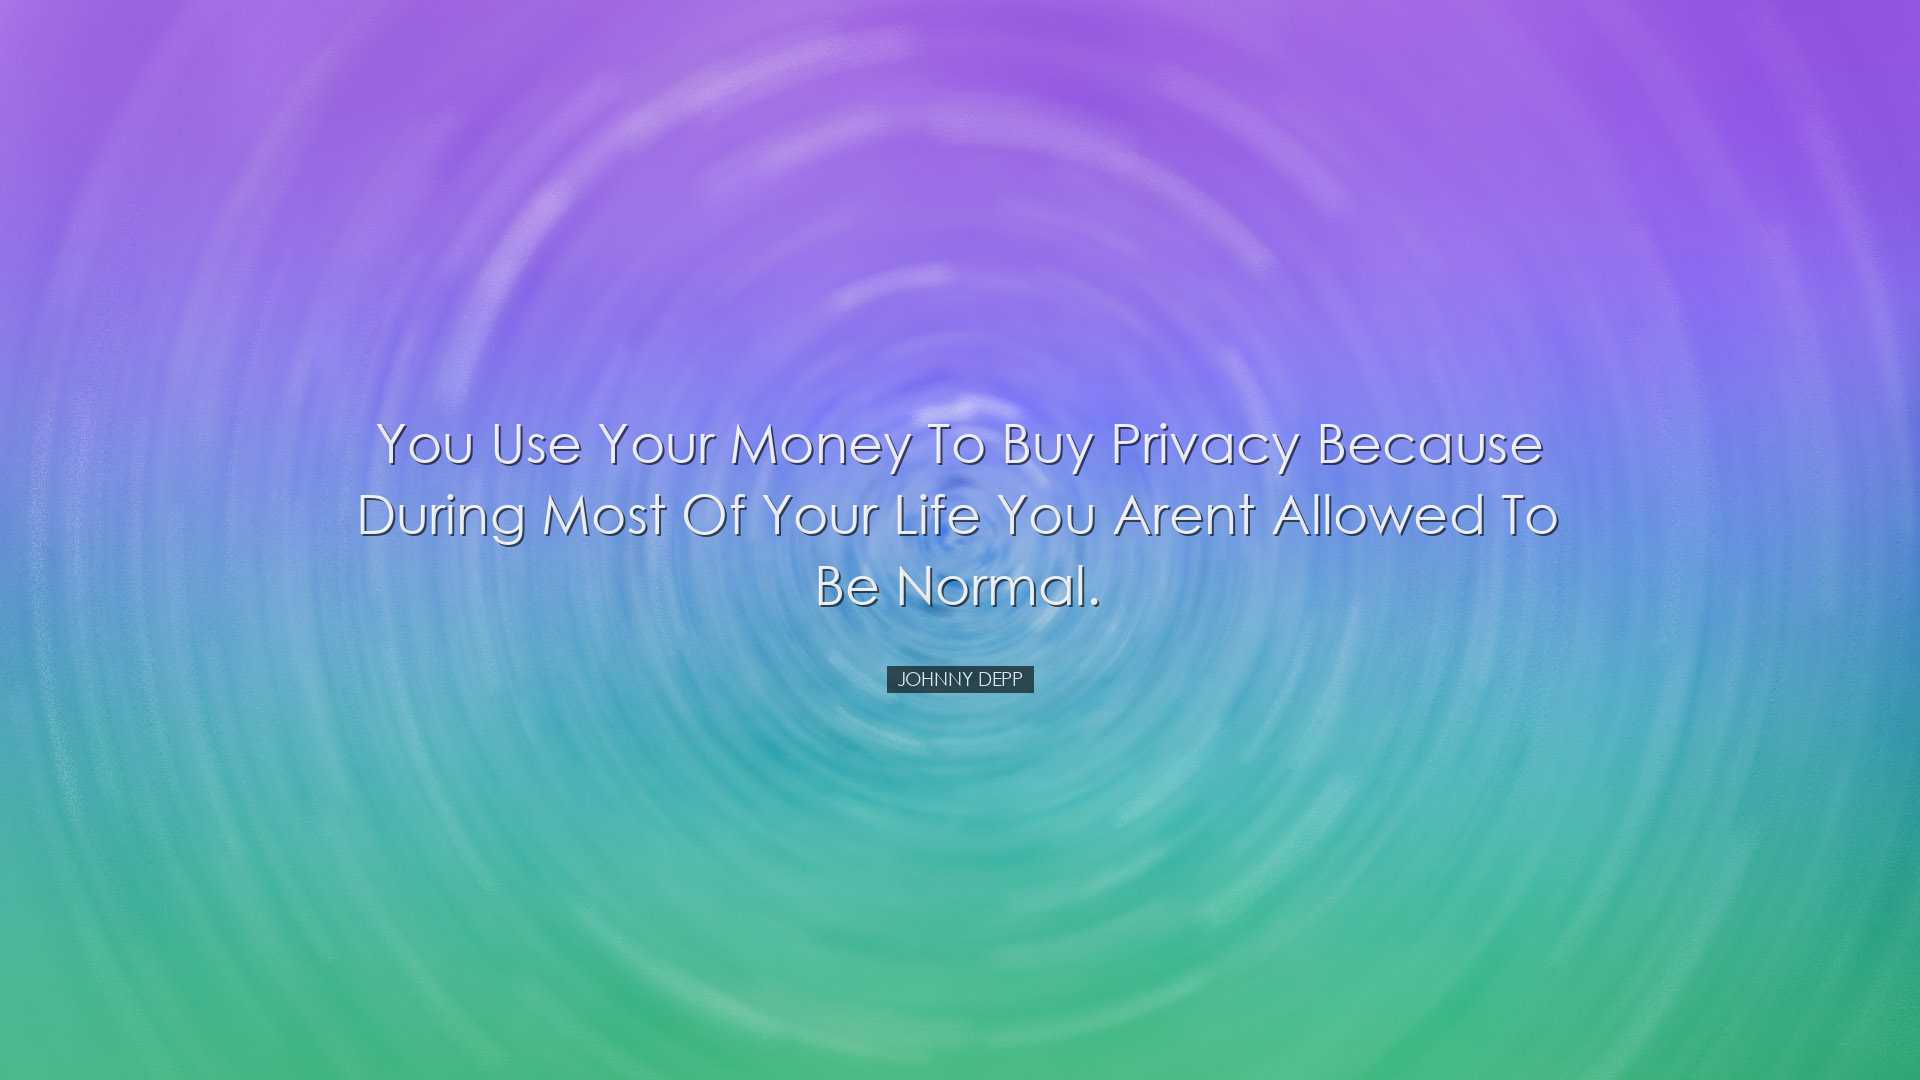 You use your money to buy privacy because during most of your life